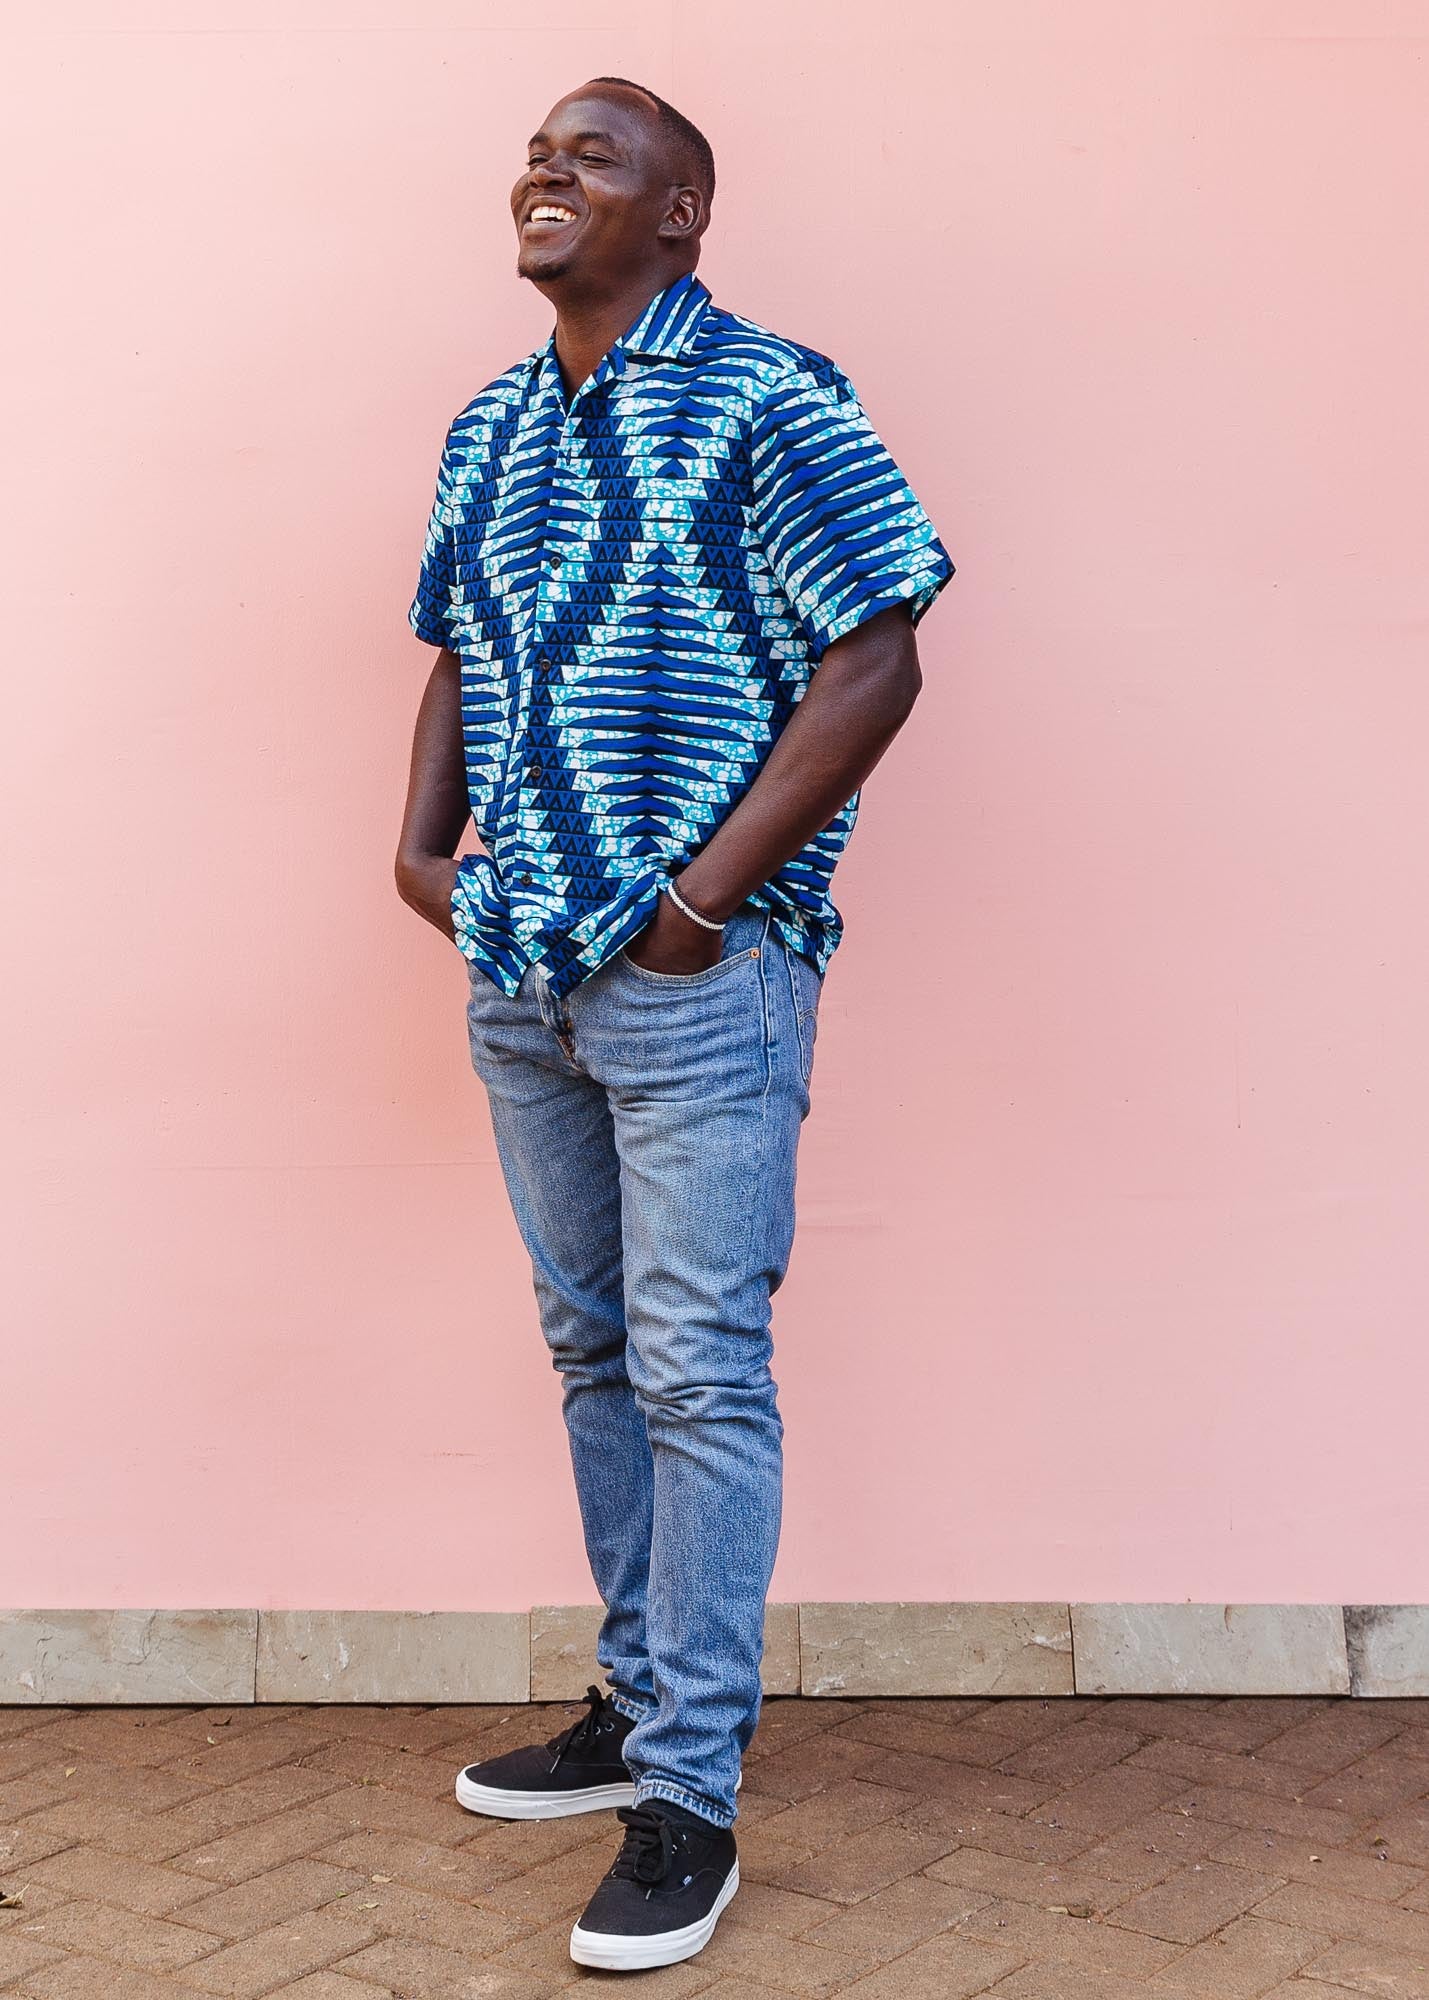 The model is wearing blue, sky blue and white colored men's shirt